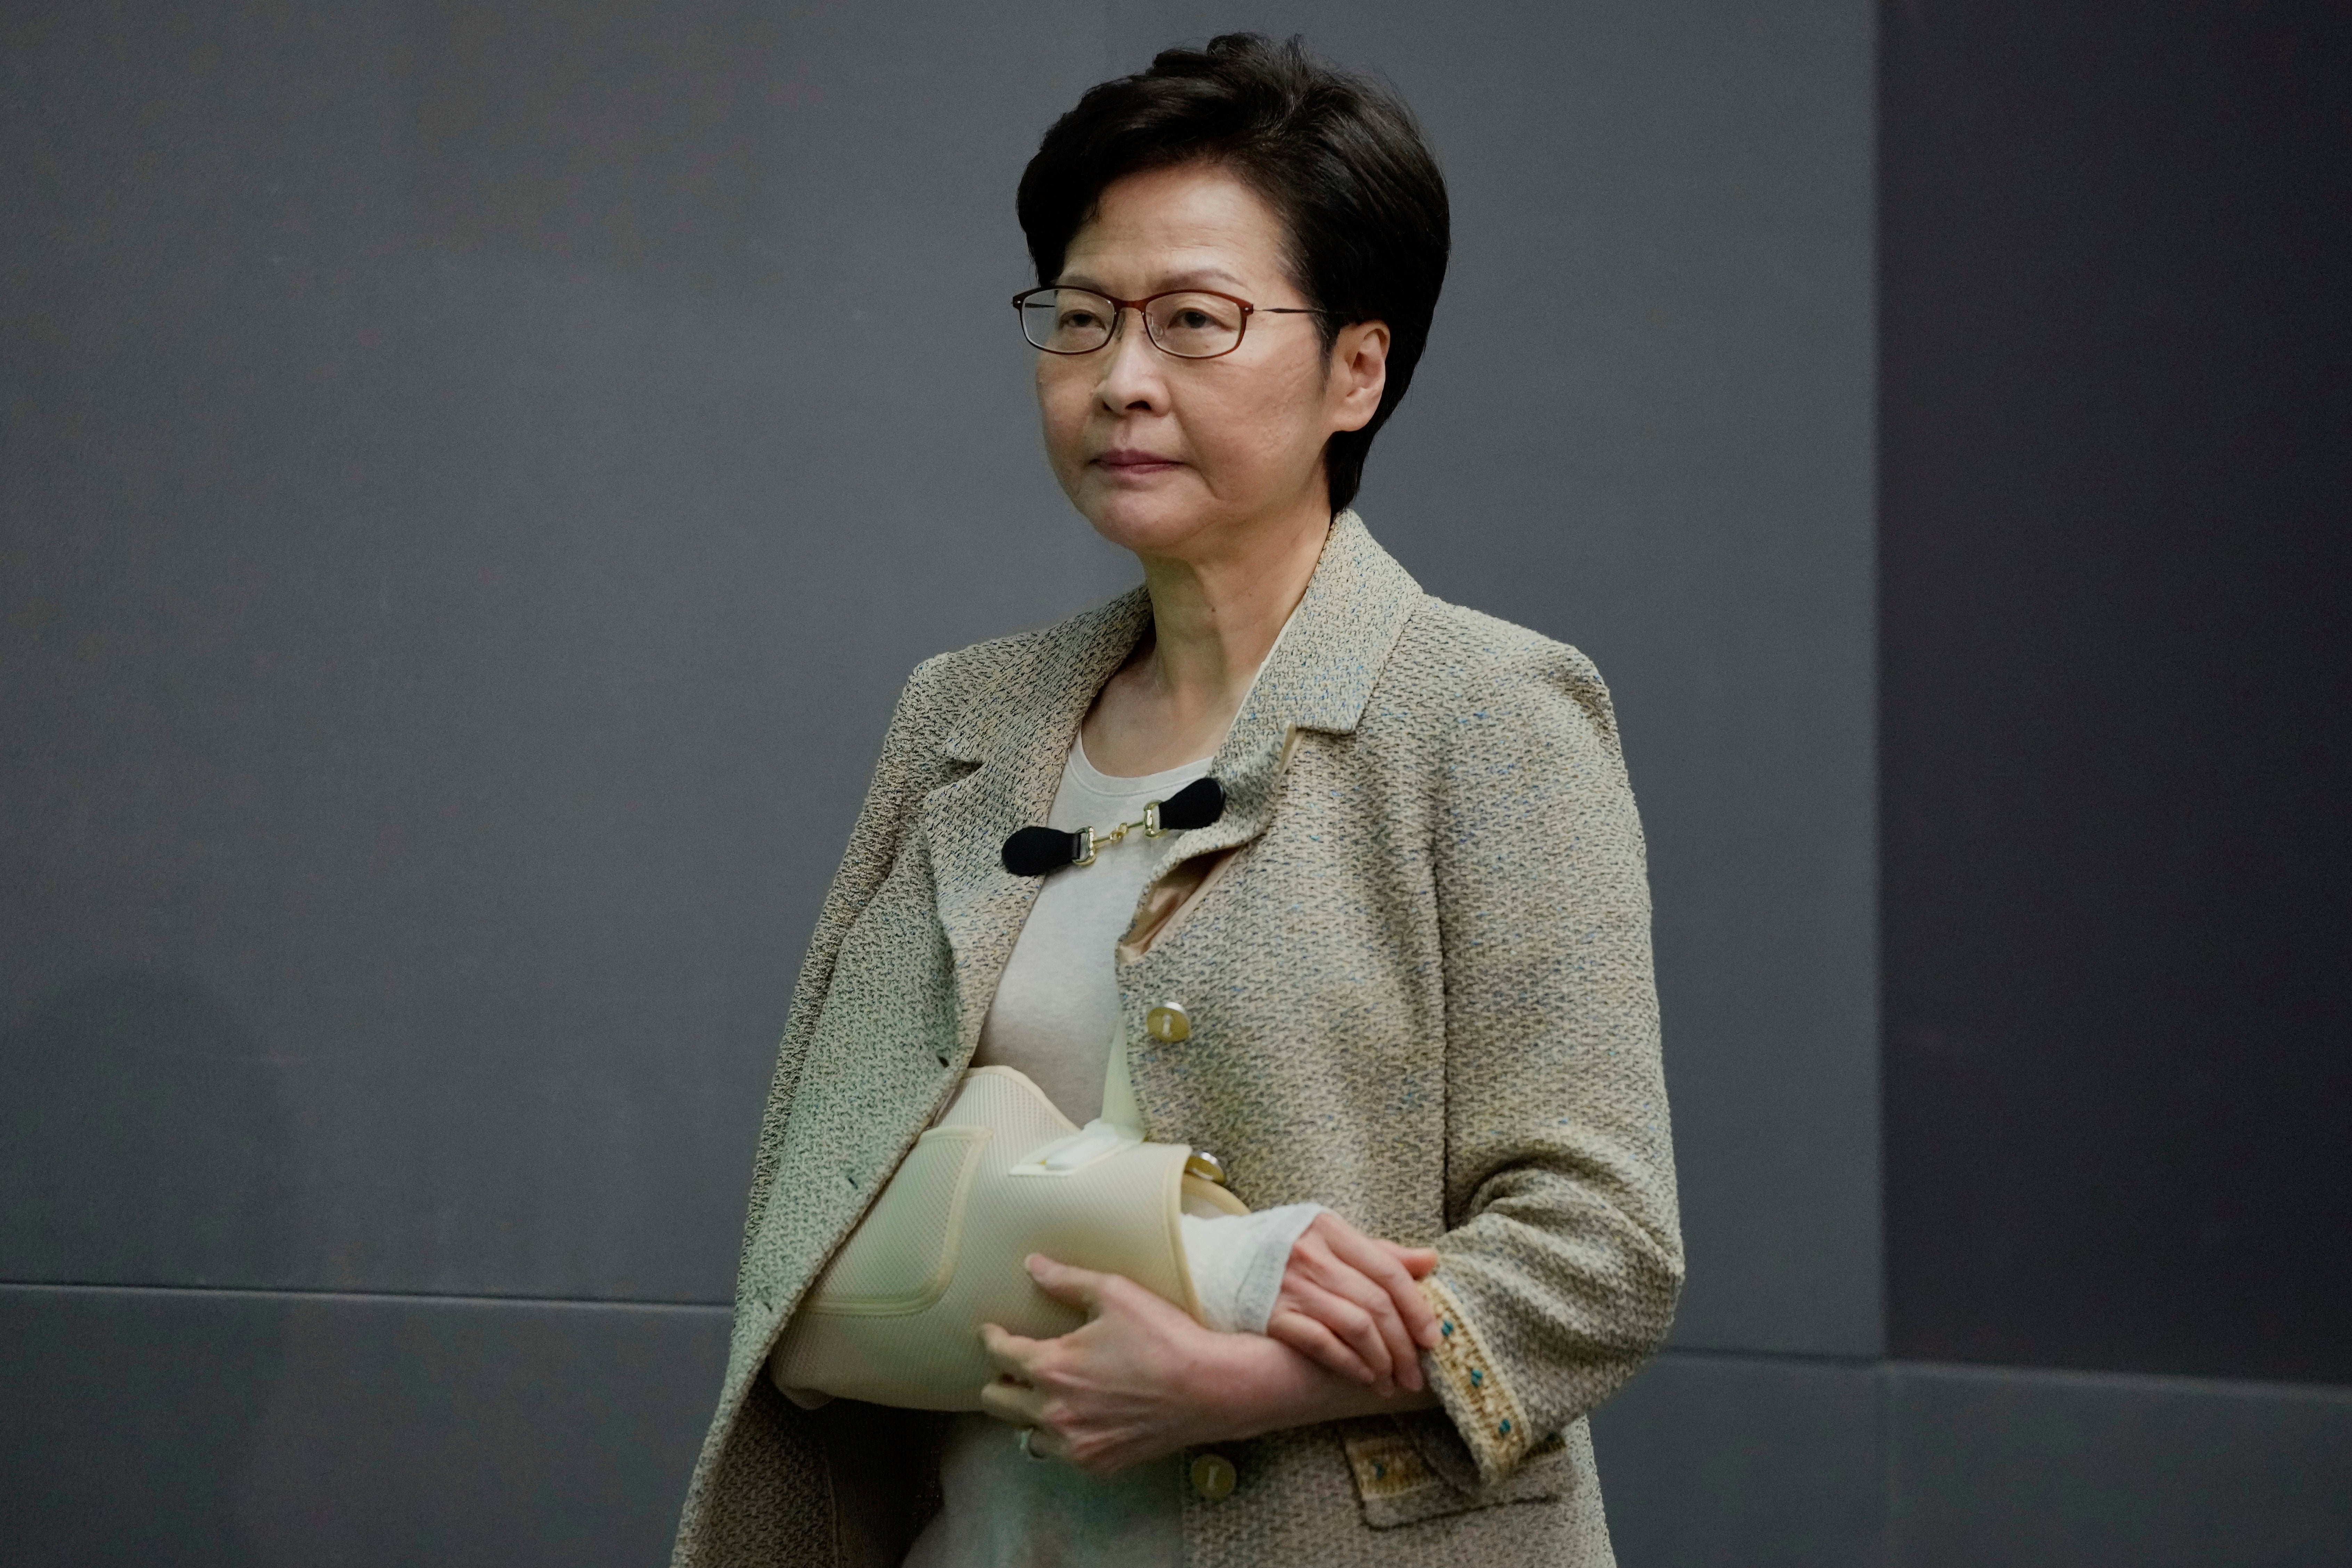 Hong Kong leader Carrie Lam said that the video was a part of school teaching material checklist